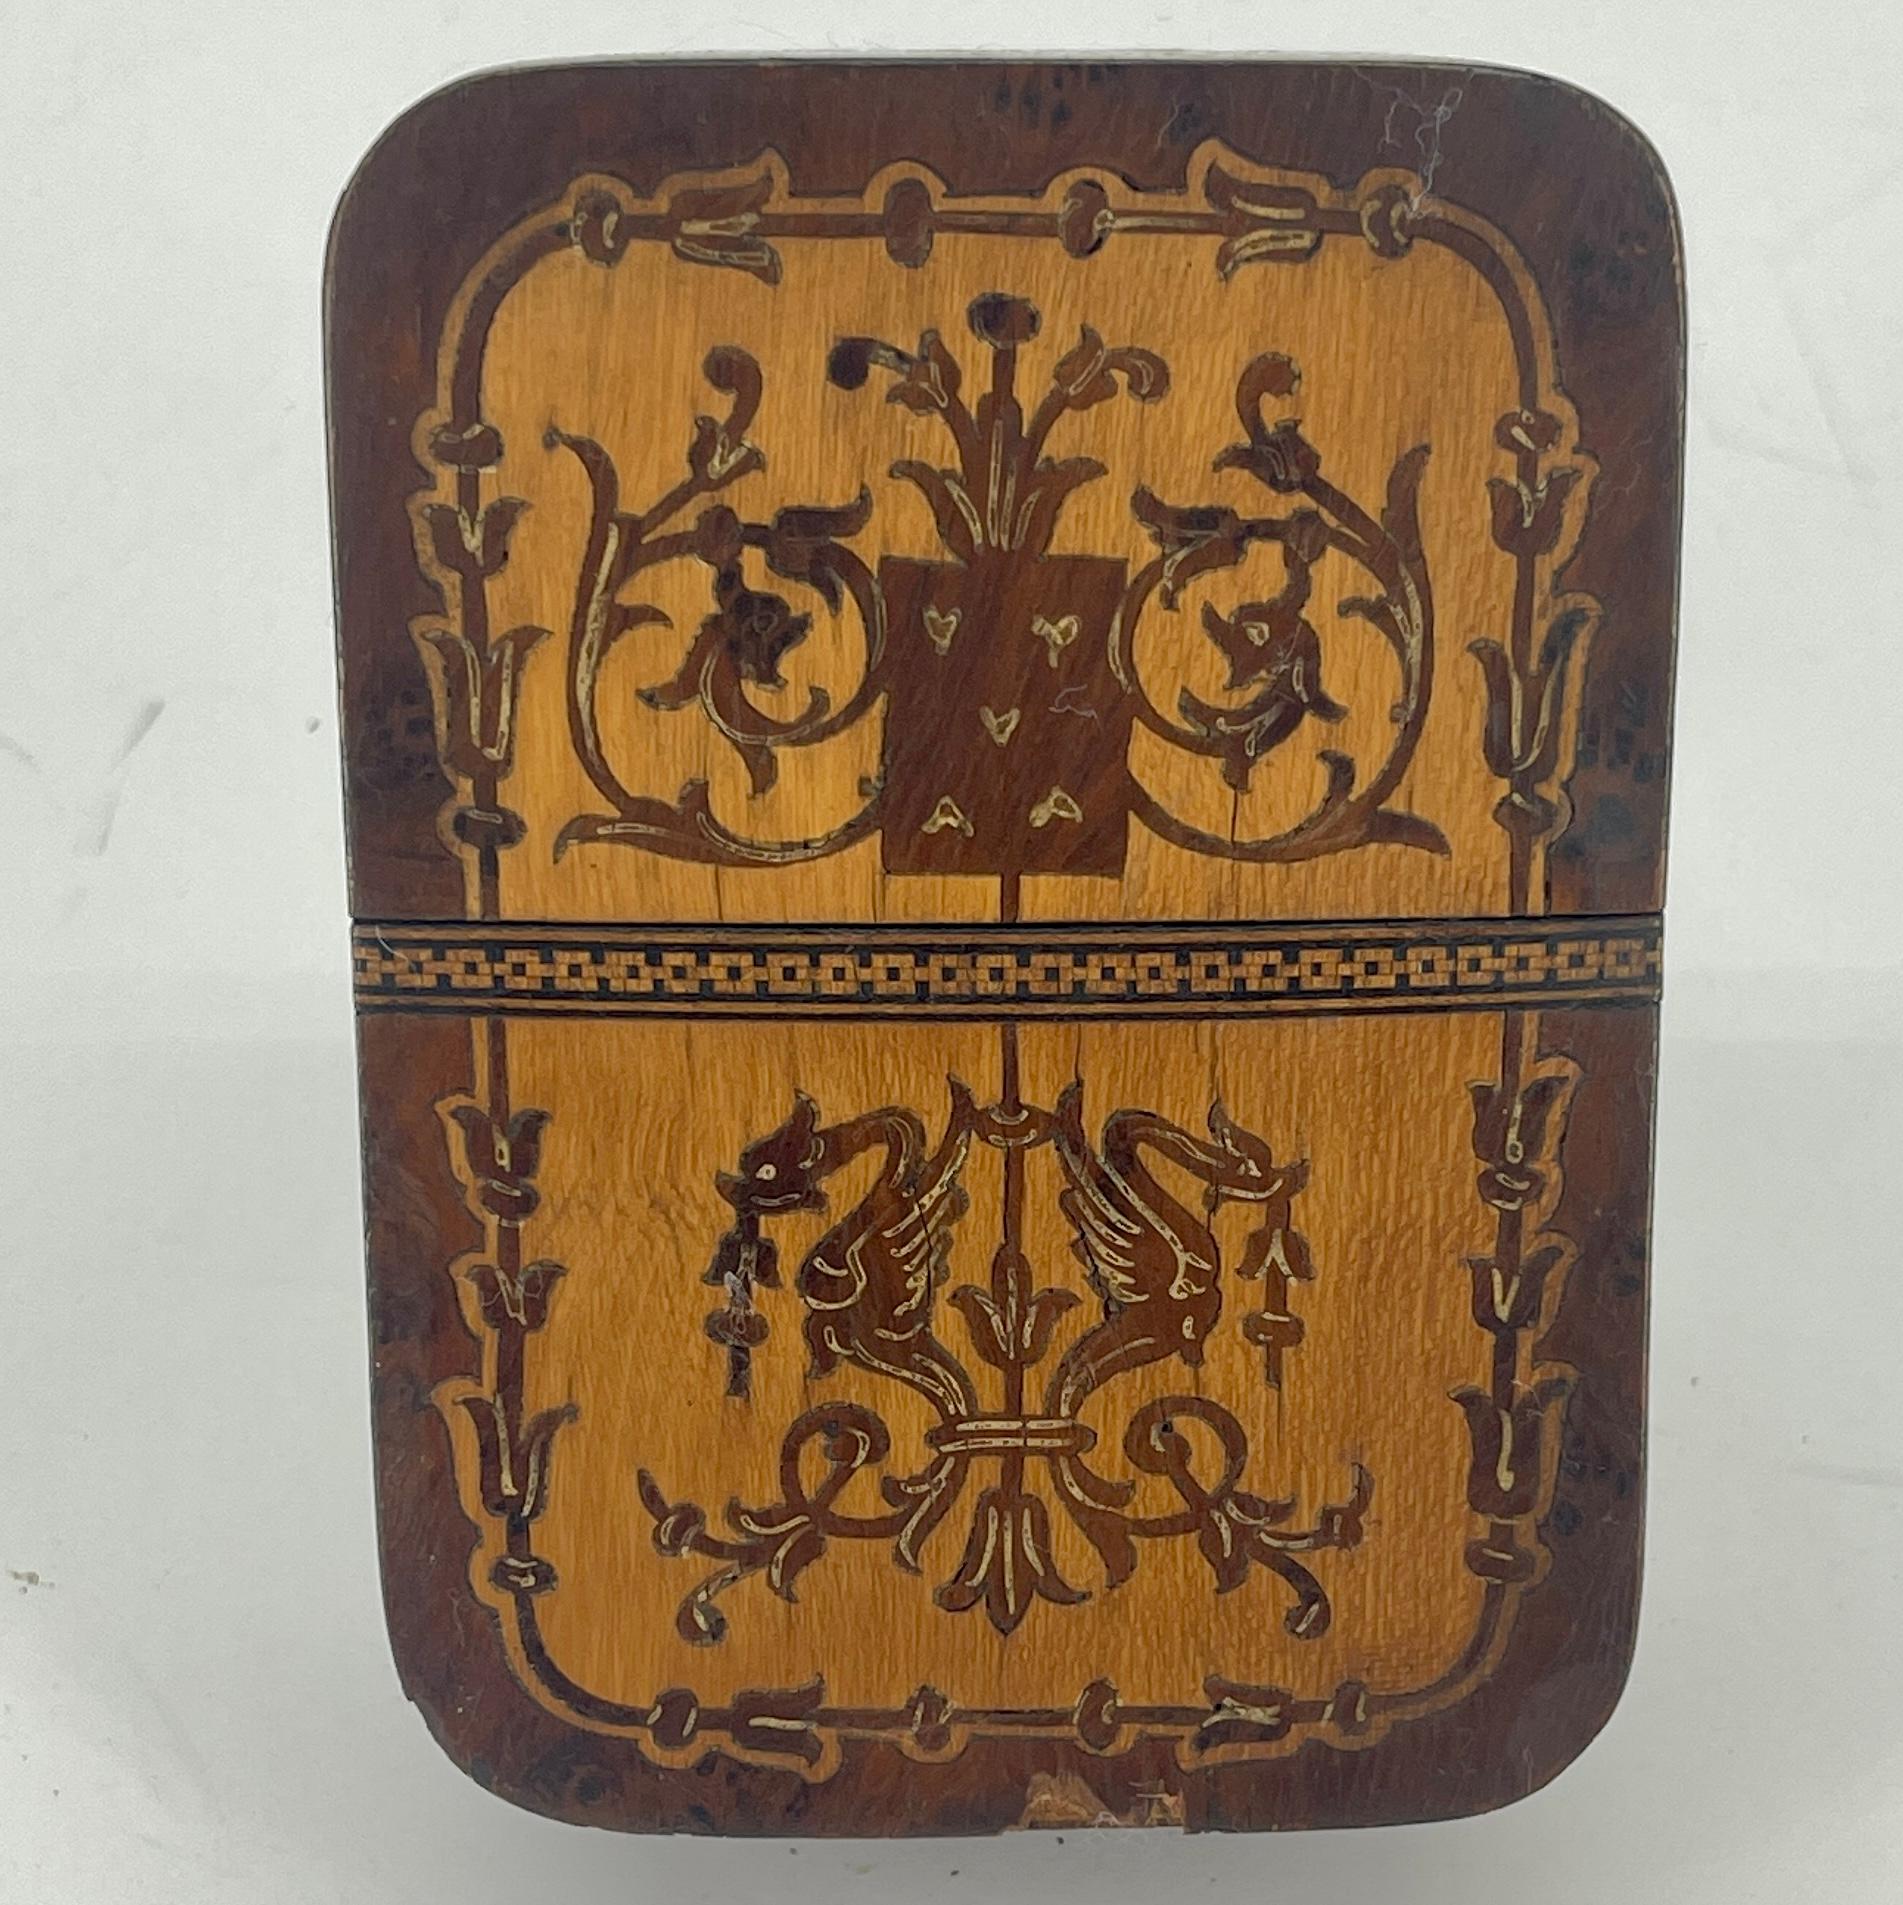 19th Century European Inlaid Game Box For Two Decks of Playing Cards.
The box is richly decorated with inlaid fruitwood and holds two set of playing cards.